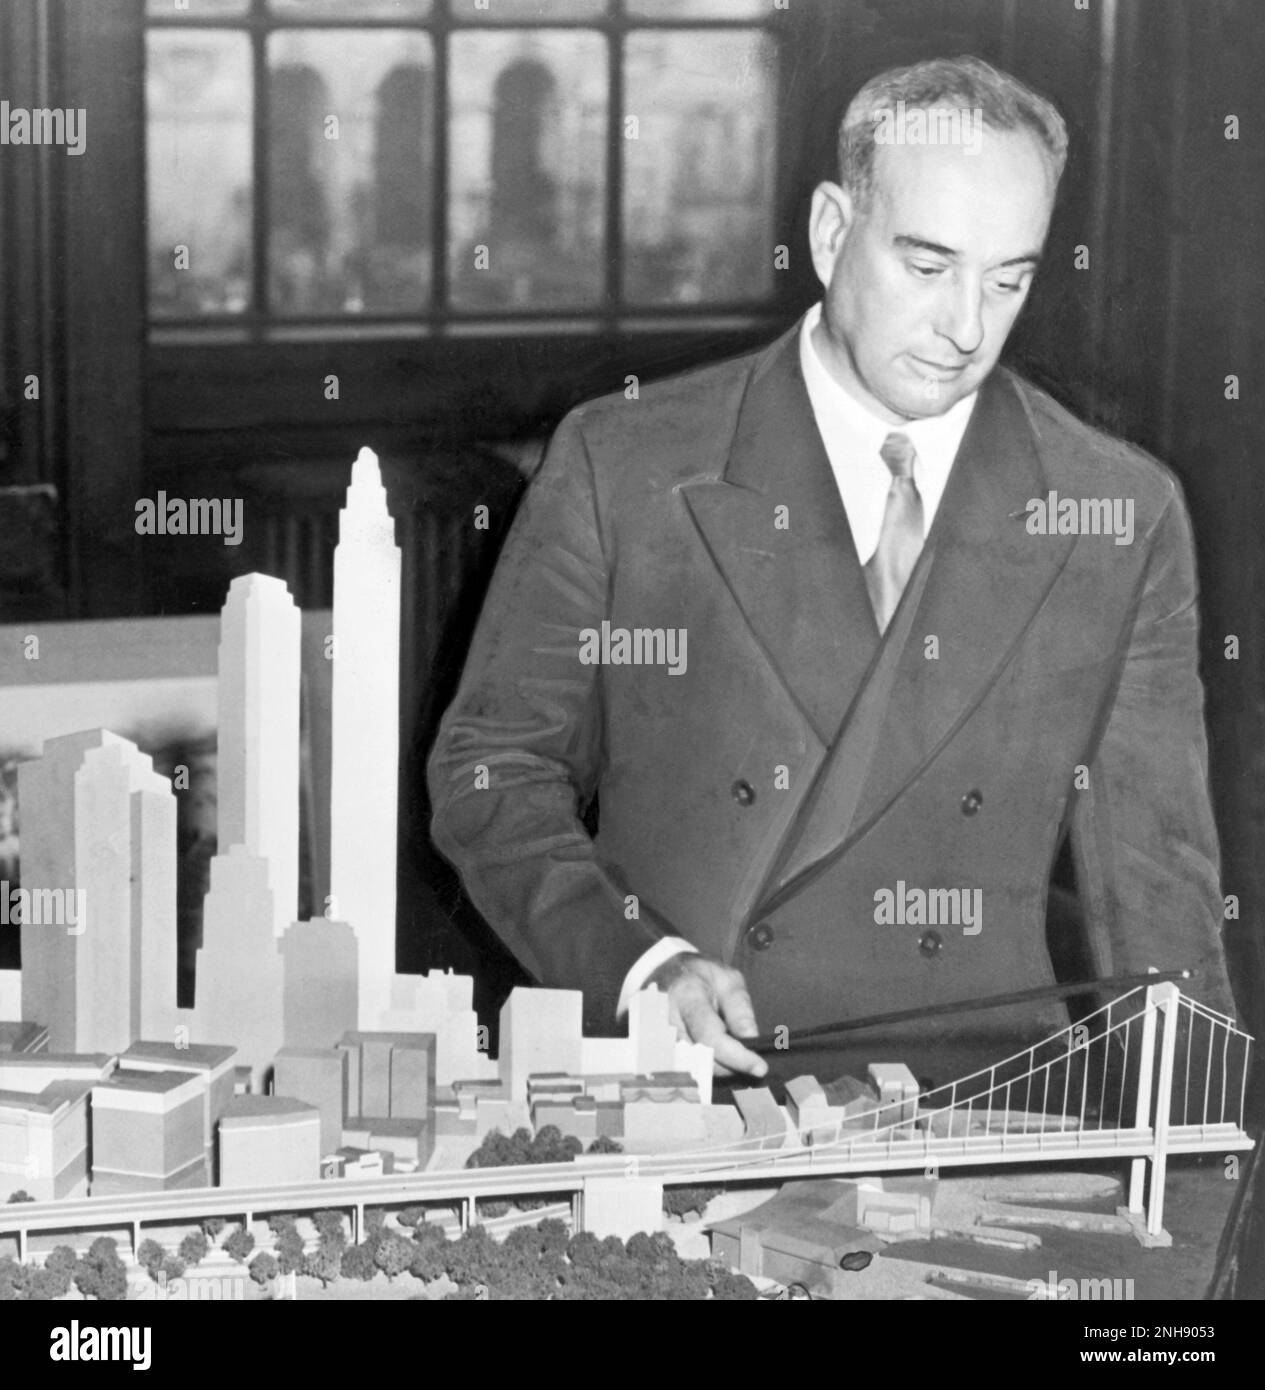 New York City Park Commissioner Robert Moses with model of the proposed Battery Bridge. Robert Moses (1888-1981) was an influential American public official whose urban planning reshaped the New York metropolitan area. Photograph by C.M. Stieglitz, 1939. Stock Photo